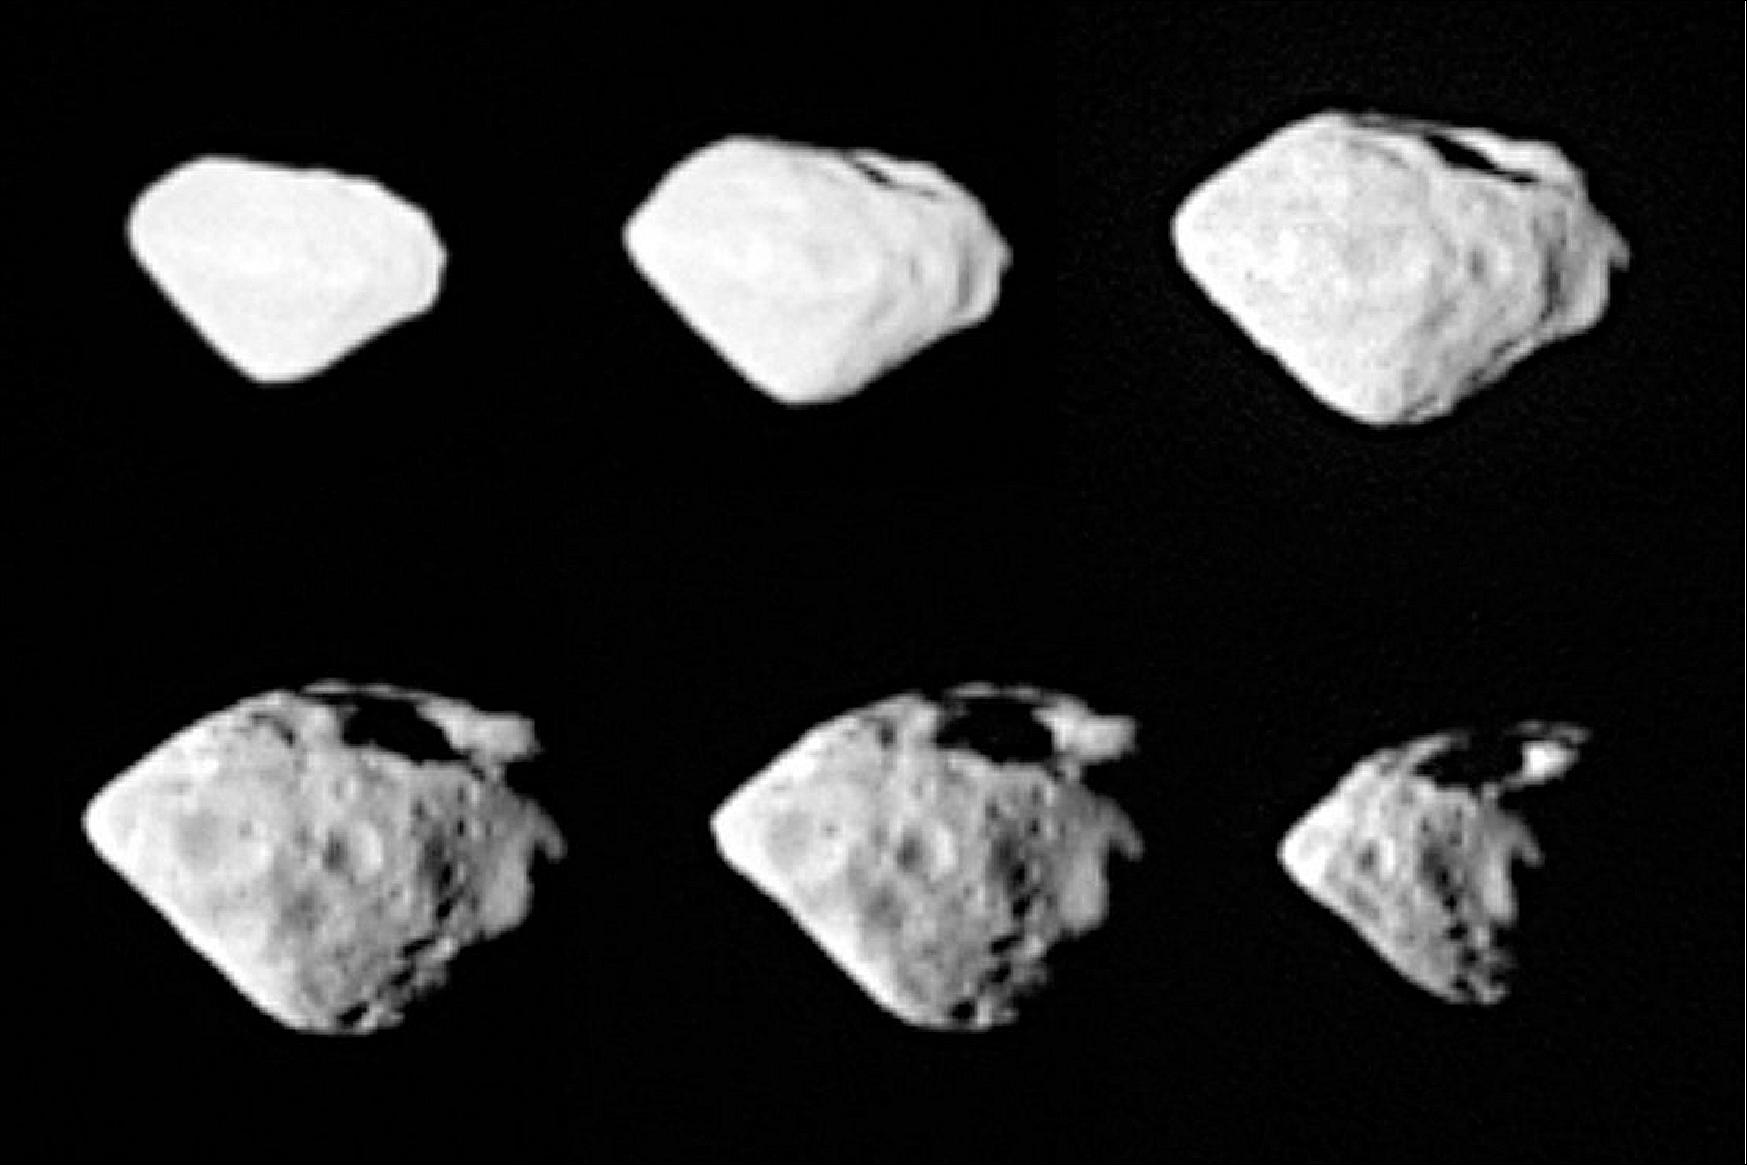 Figure 74: Asteroid Steins seen from a distance of 800 km, taken by the OSIRIS imaging system from two different perspectives. The effective diameter of the asteroid is 5 km, approximately as predicted. At the top of the asteroid (as shown in this image), a large crater, approximately 1.5-km in size, can be seen. Scientists were amazed that the asteroid survived the impact that was responsible for the crater (image credit: ESA ©2008 MPS for OSIRIS Team MPS/UPD/LAM/IAA/RSSD/INTA/UPM/DASP/IDA) 105)